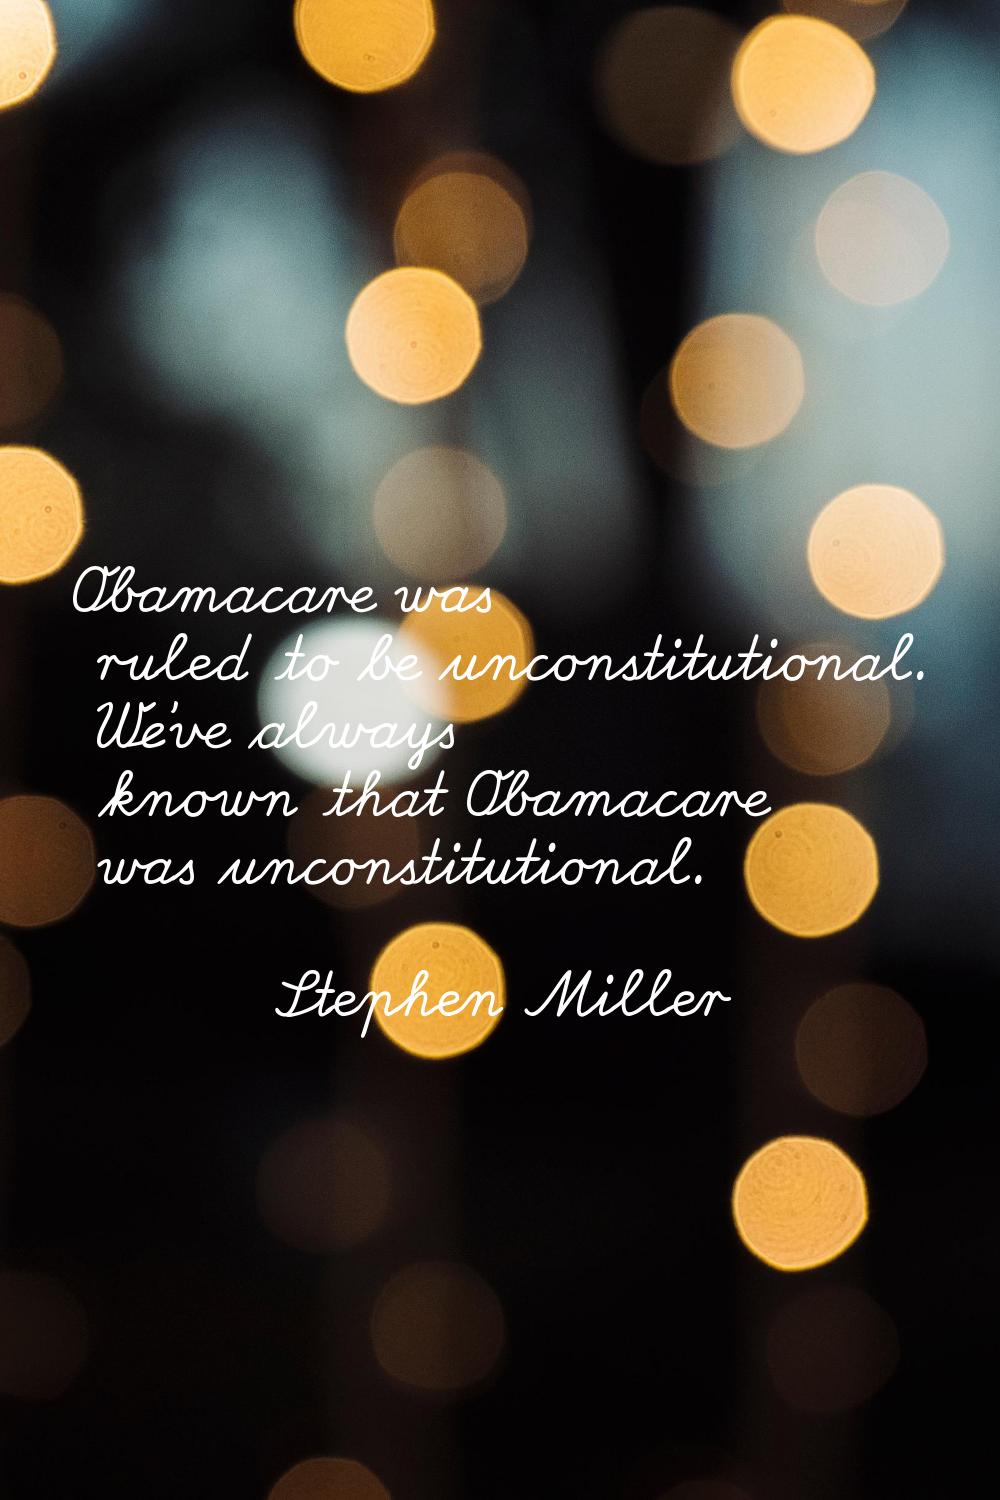 Obamacare was ruled to be unconstitutional. We've always known that Obamacare was unconstitutional.